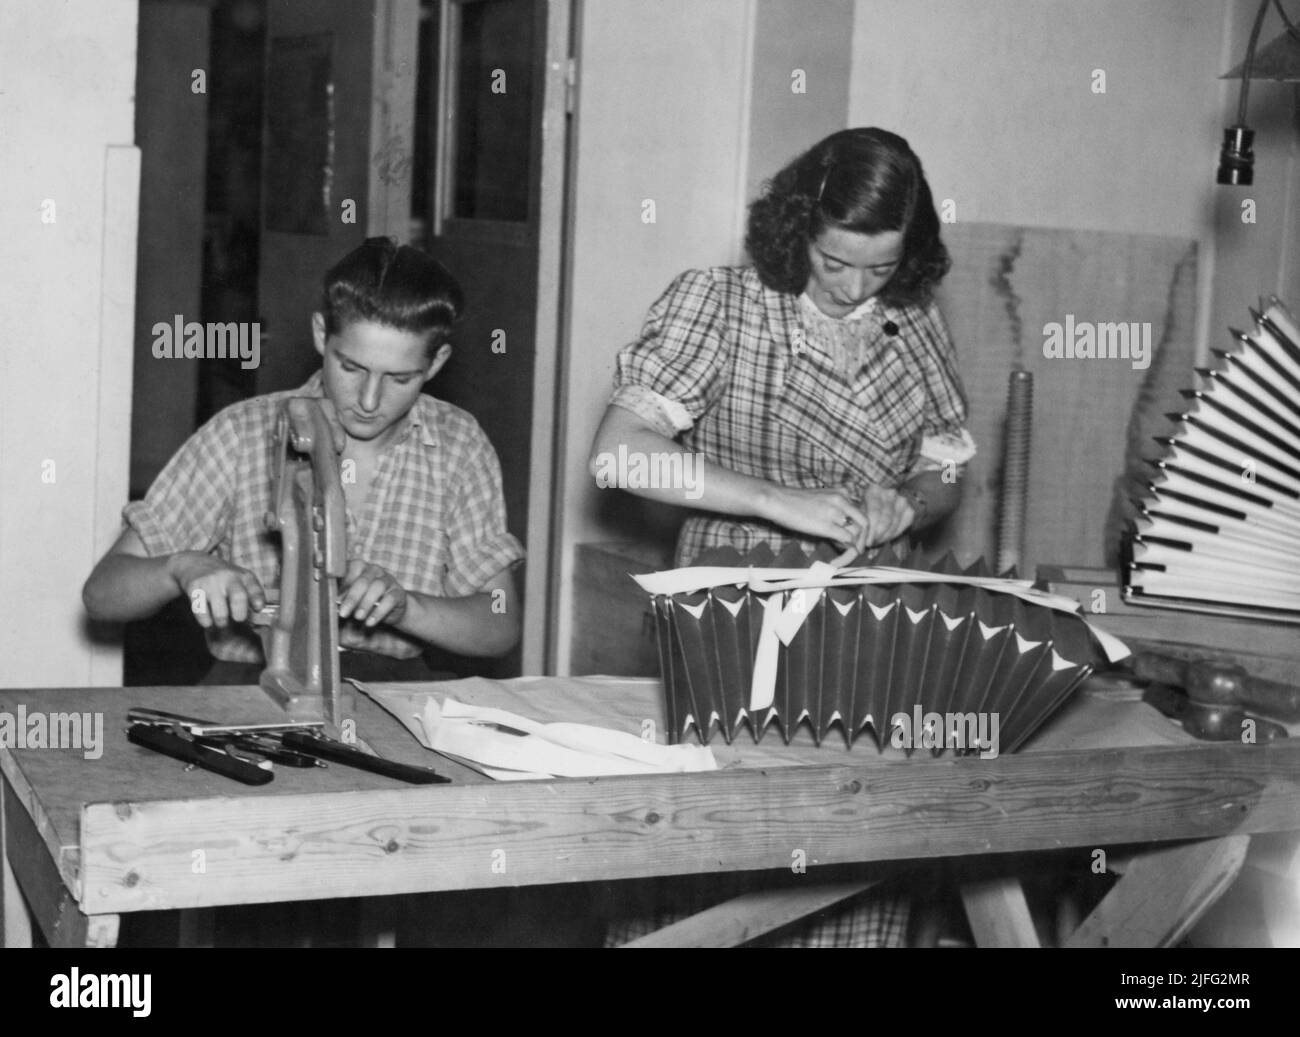 Accordion manufacturing. Interior of Ragnar Sundquists accordion factory in Stockholm. He was one of the most popular accordion players during the first half of the 20the century. He started manufacturing accordions that beared his name somewhat; Raggie Special. Picture shows a man and woman in the factory 1939. Stock Photo